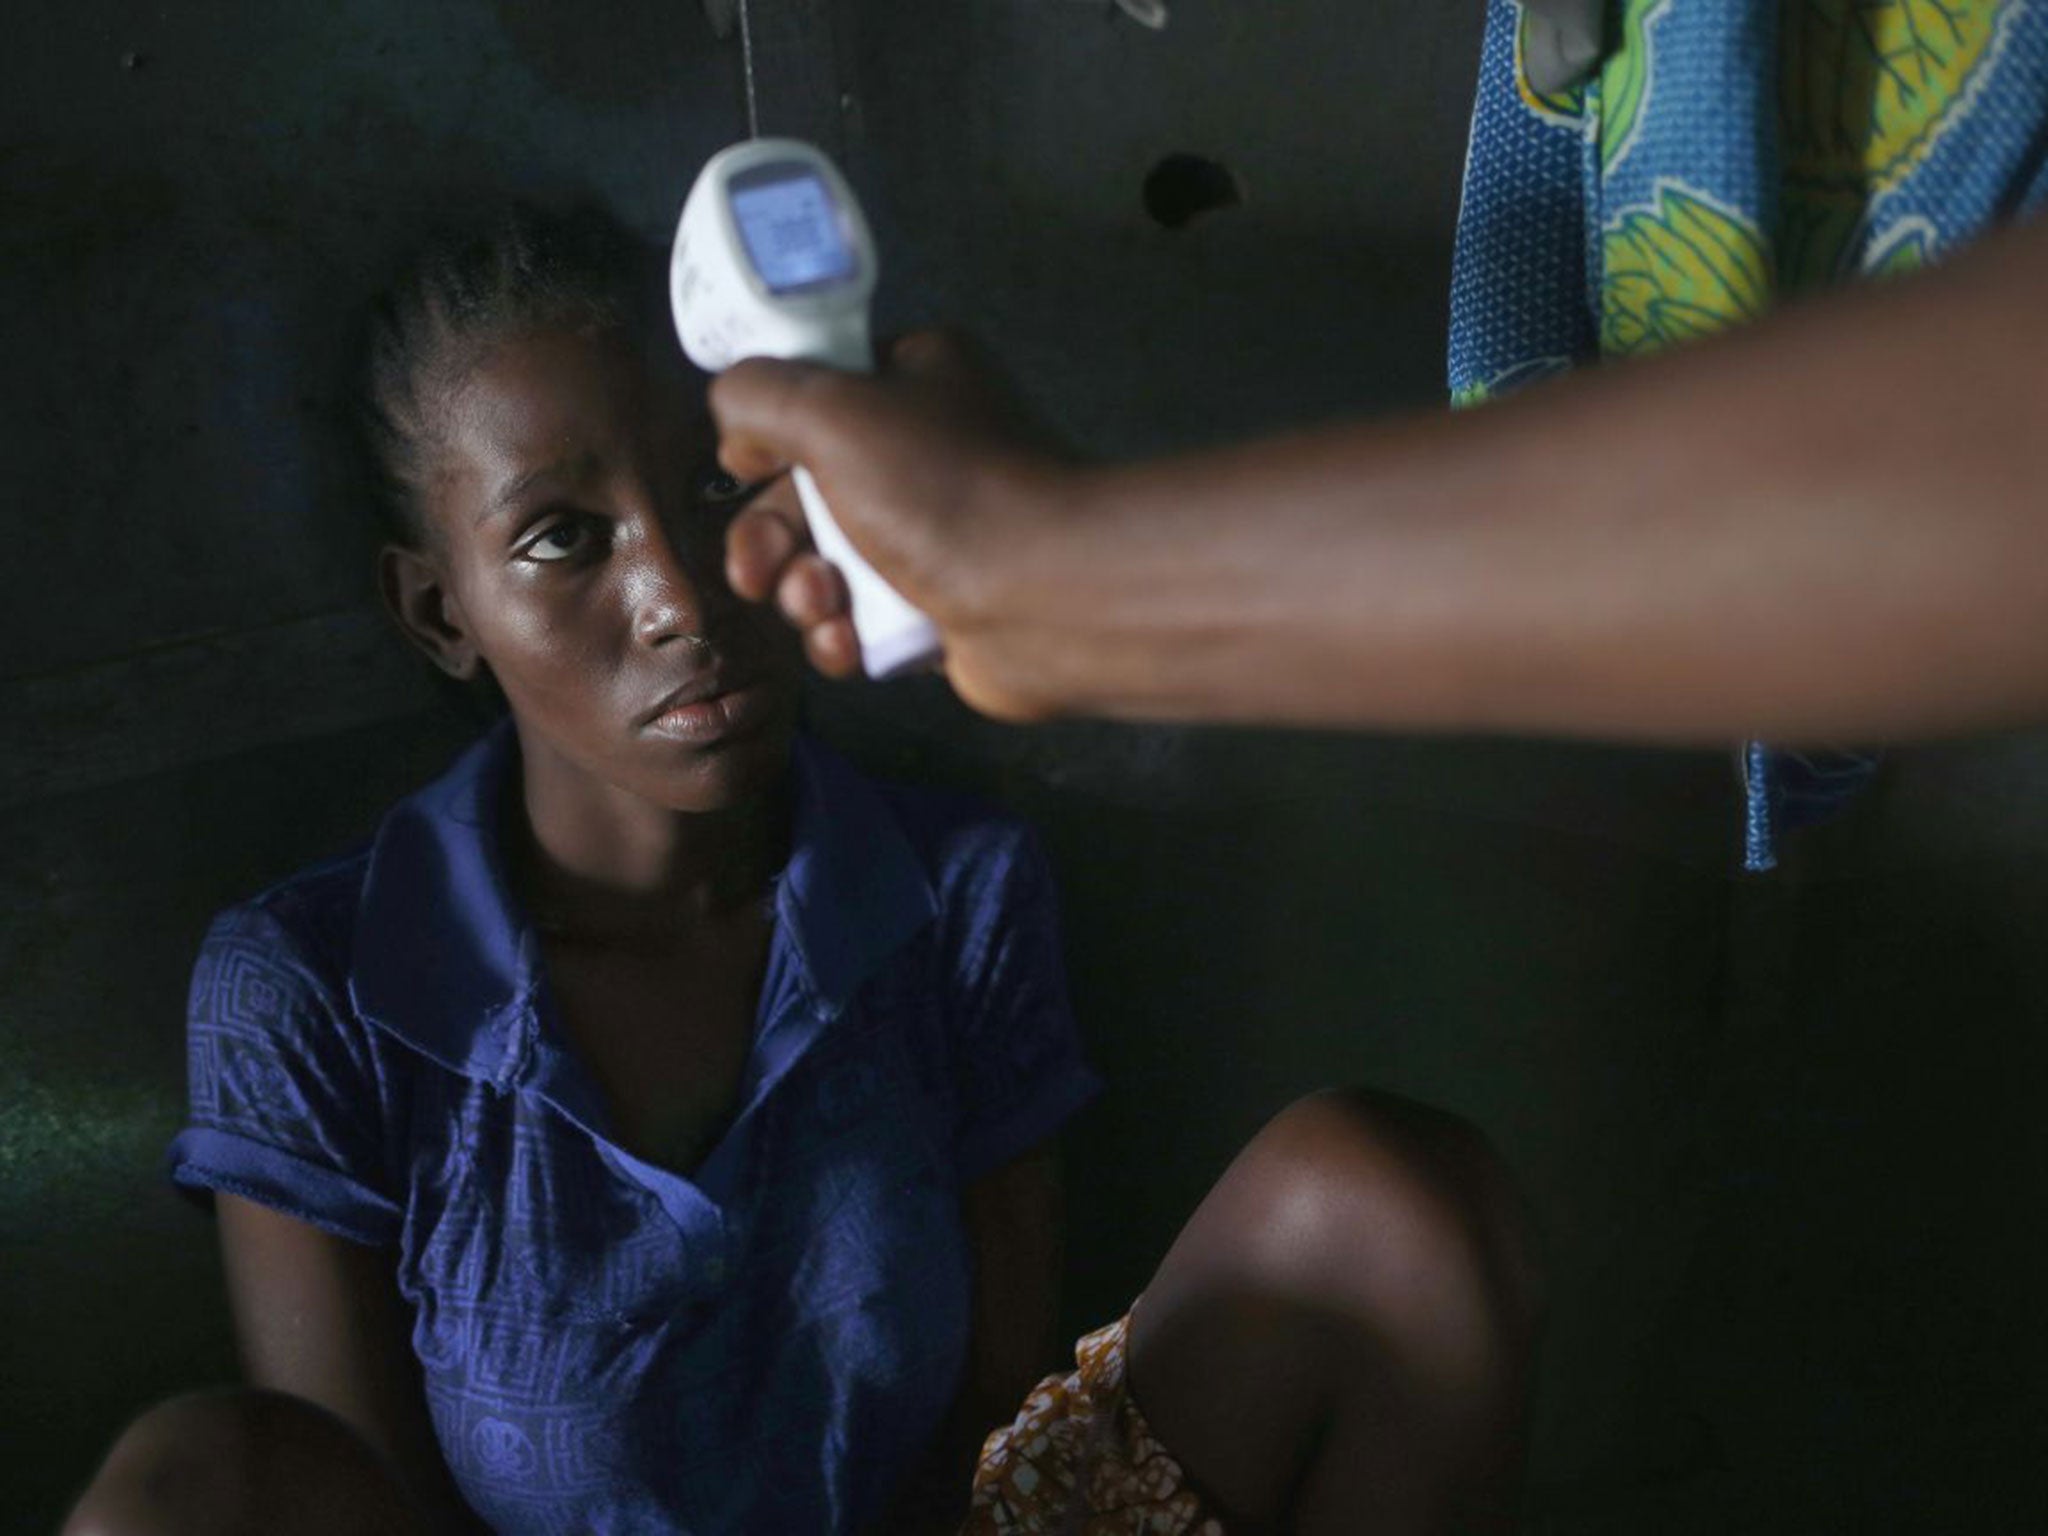 Jessica Sompon, 17, has her temperature taken on Friday in Monrovia, Liberia, after developing a fever. A relative had died from Ebola the day before